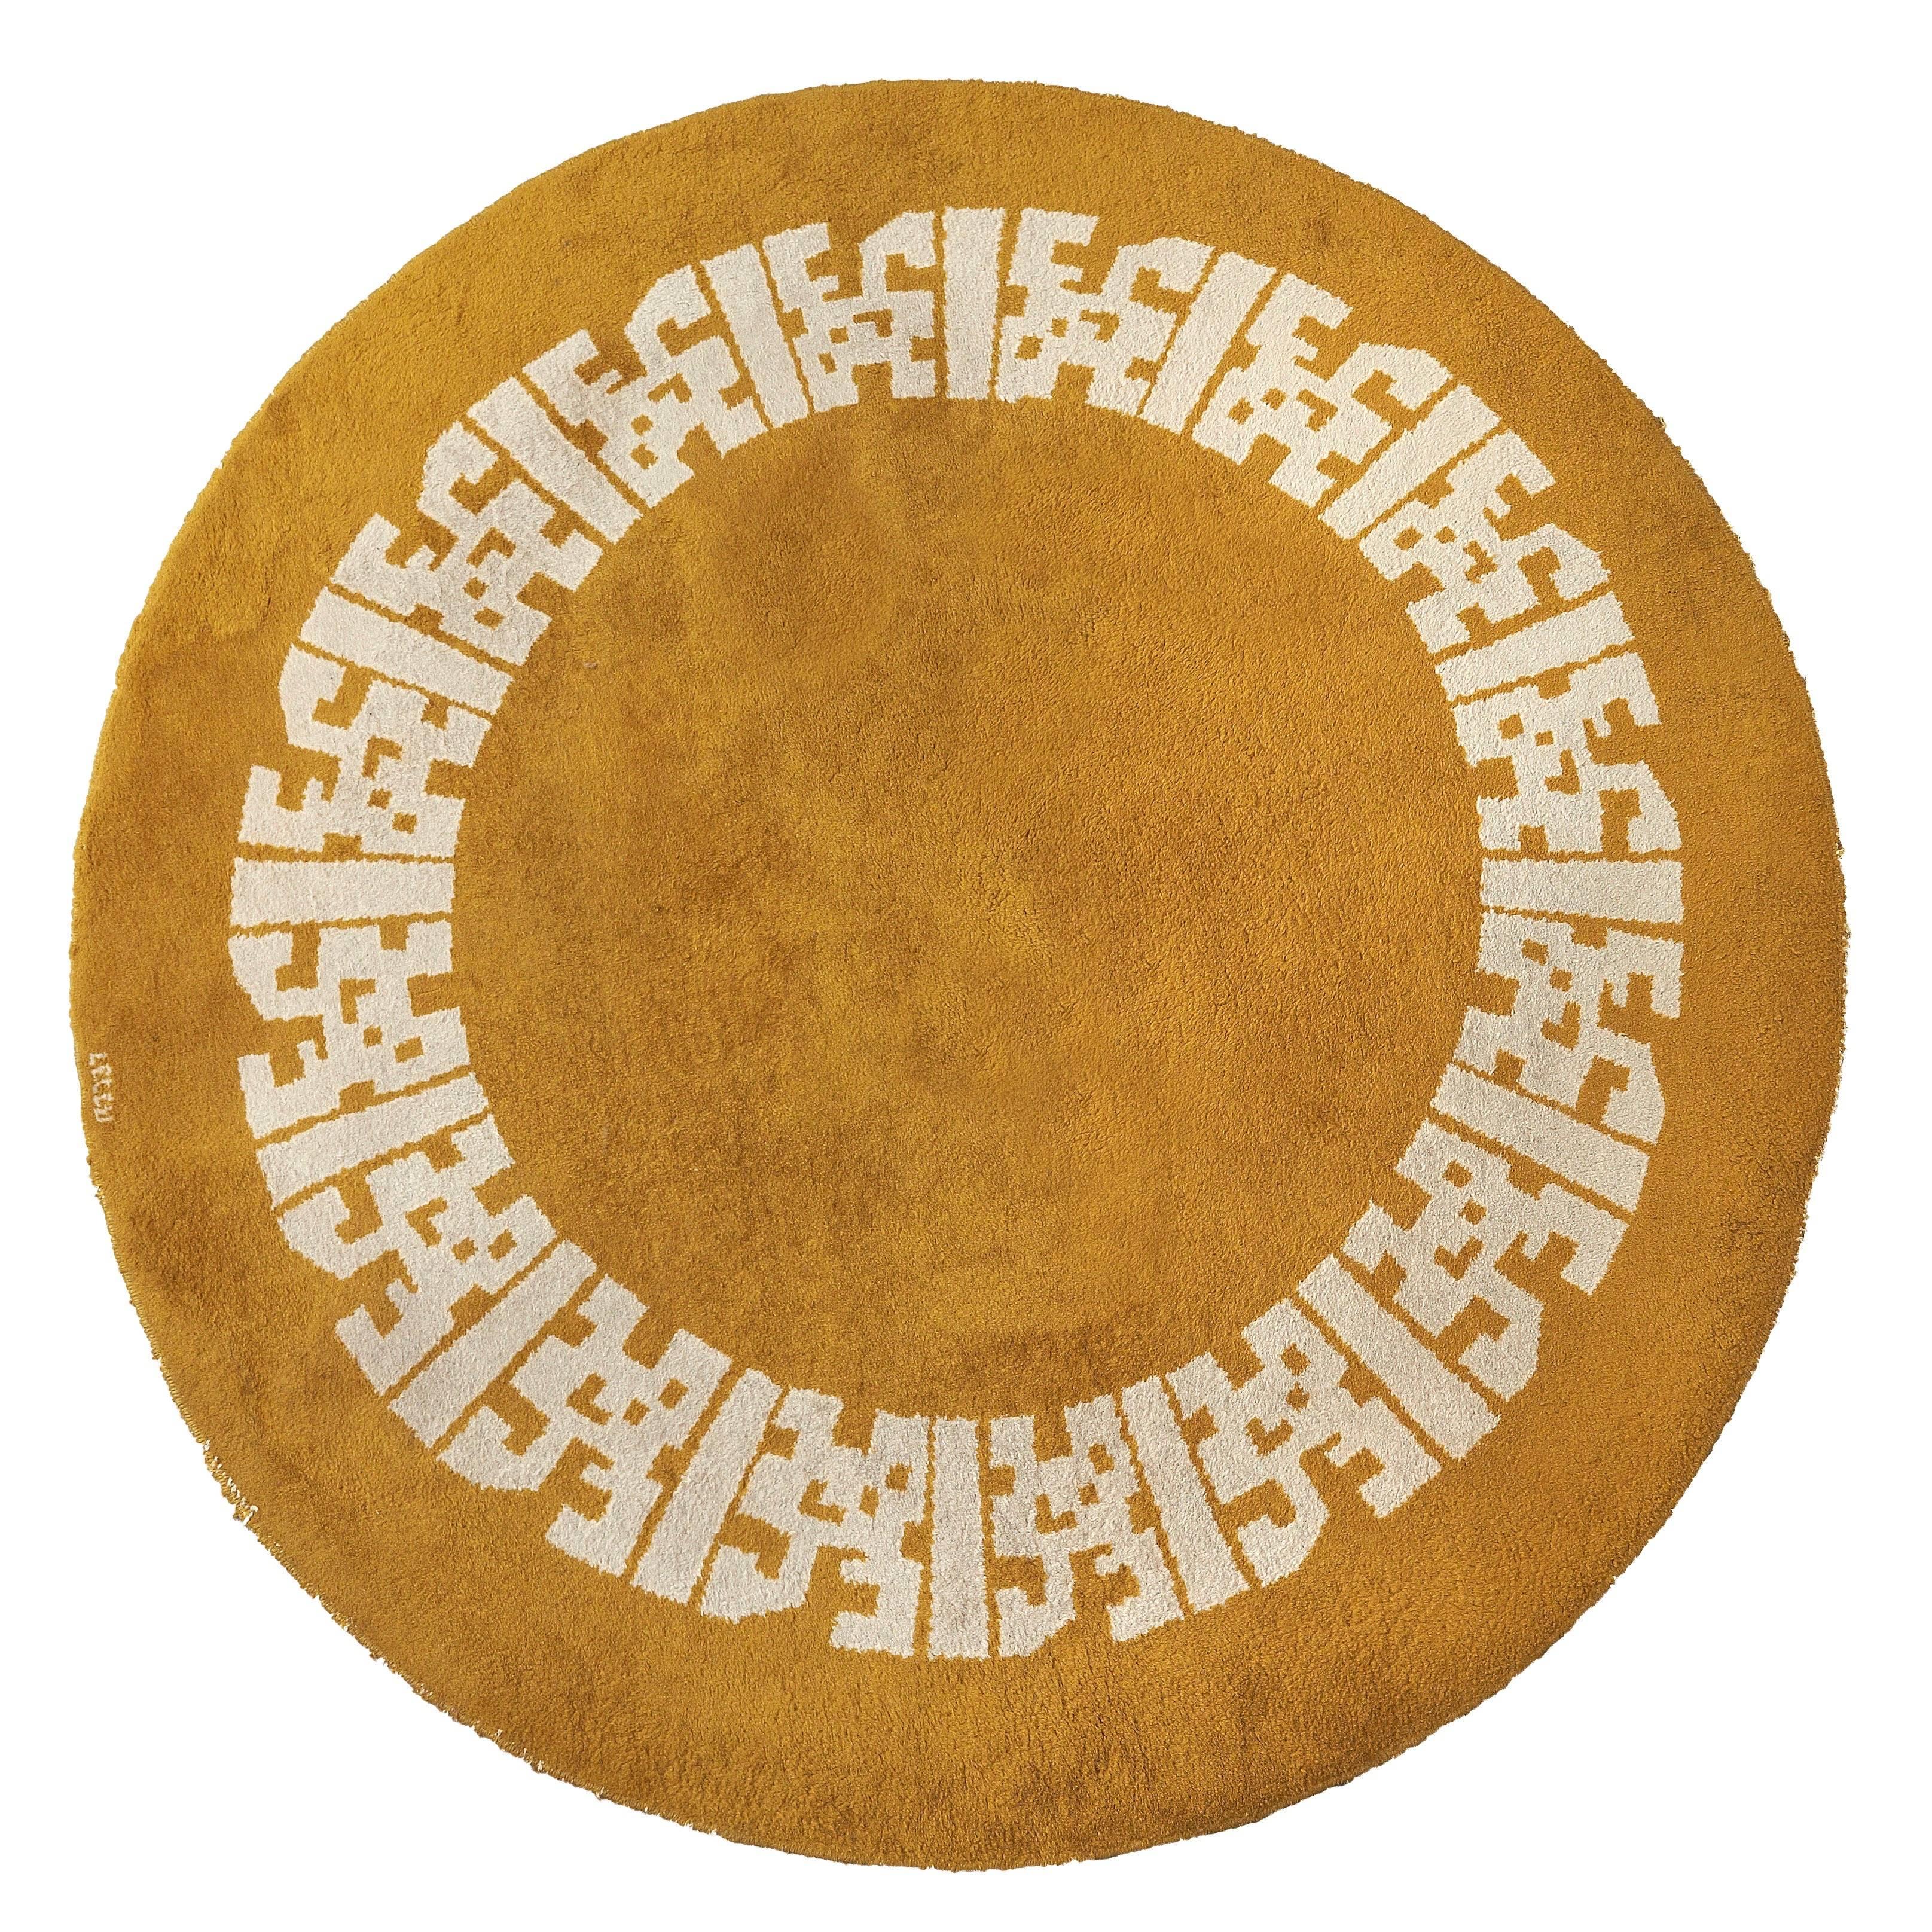 A round woolen carpet with white geometrical decoration on a yellow background.
Signed 'LELEU' in the thread.